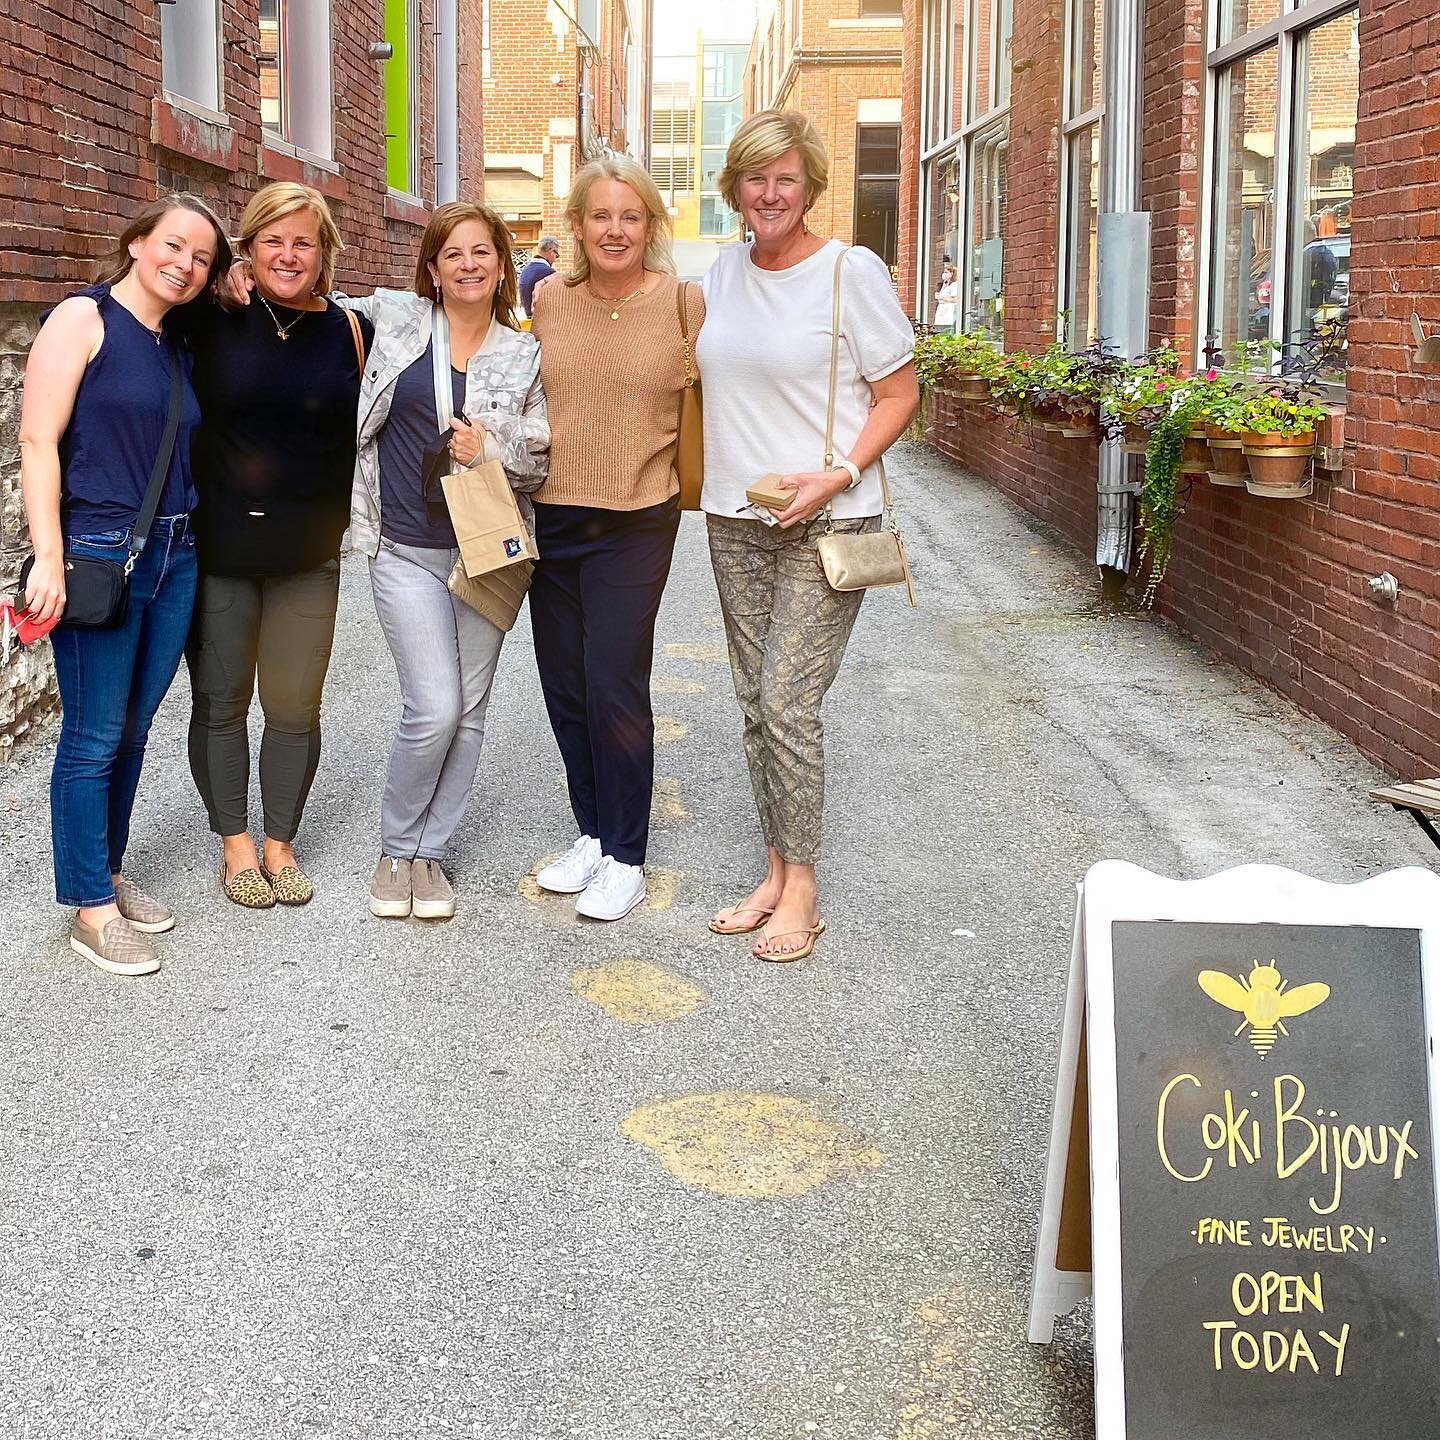 So fun to have the &ldquo;Queen Bees&rdquo; from @beeorganizedkc stop by the shop on Saturday!  It was great to meet all of you lovely ladies and hope you are enjoying your new bee necklaces! ❤️🐝
.
.
#cokibijoux #handmadejewelry #kccrossroads #bauer